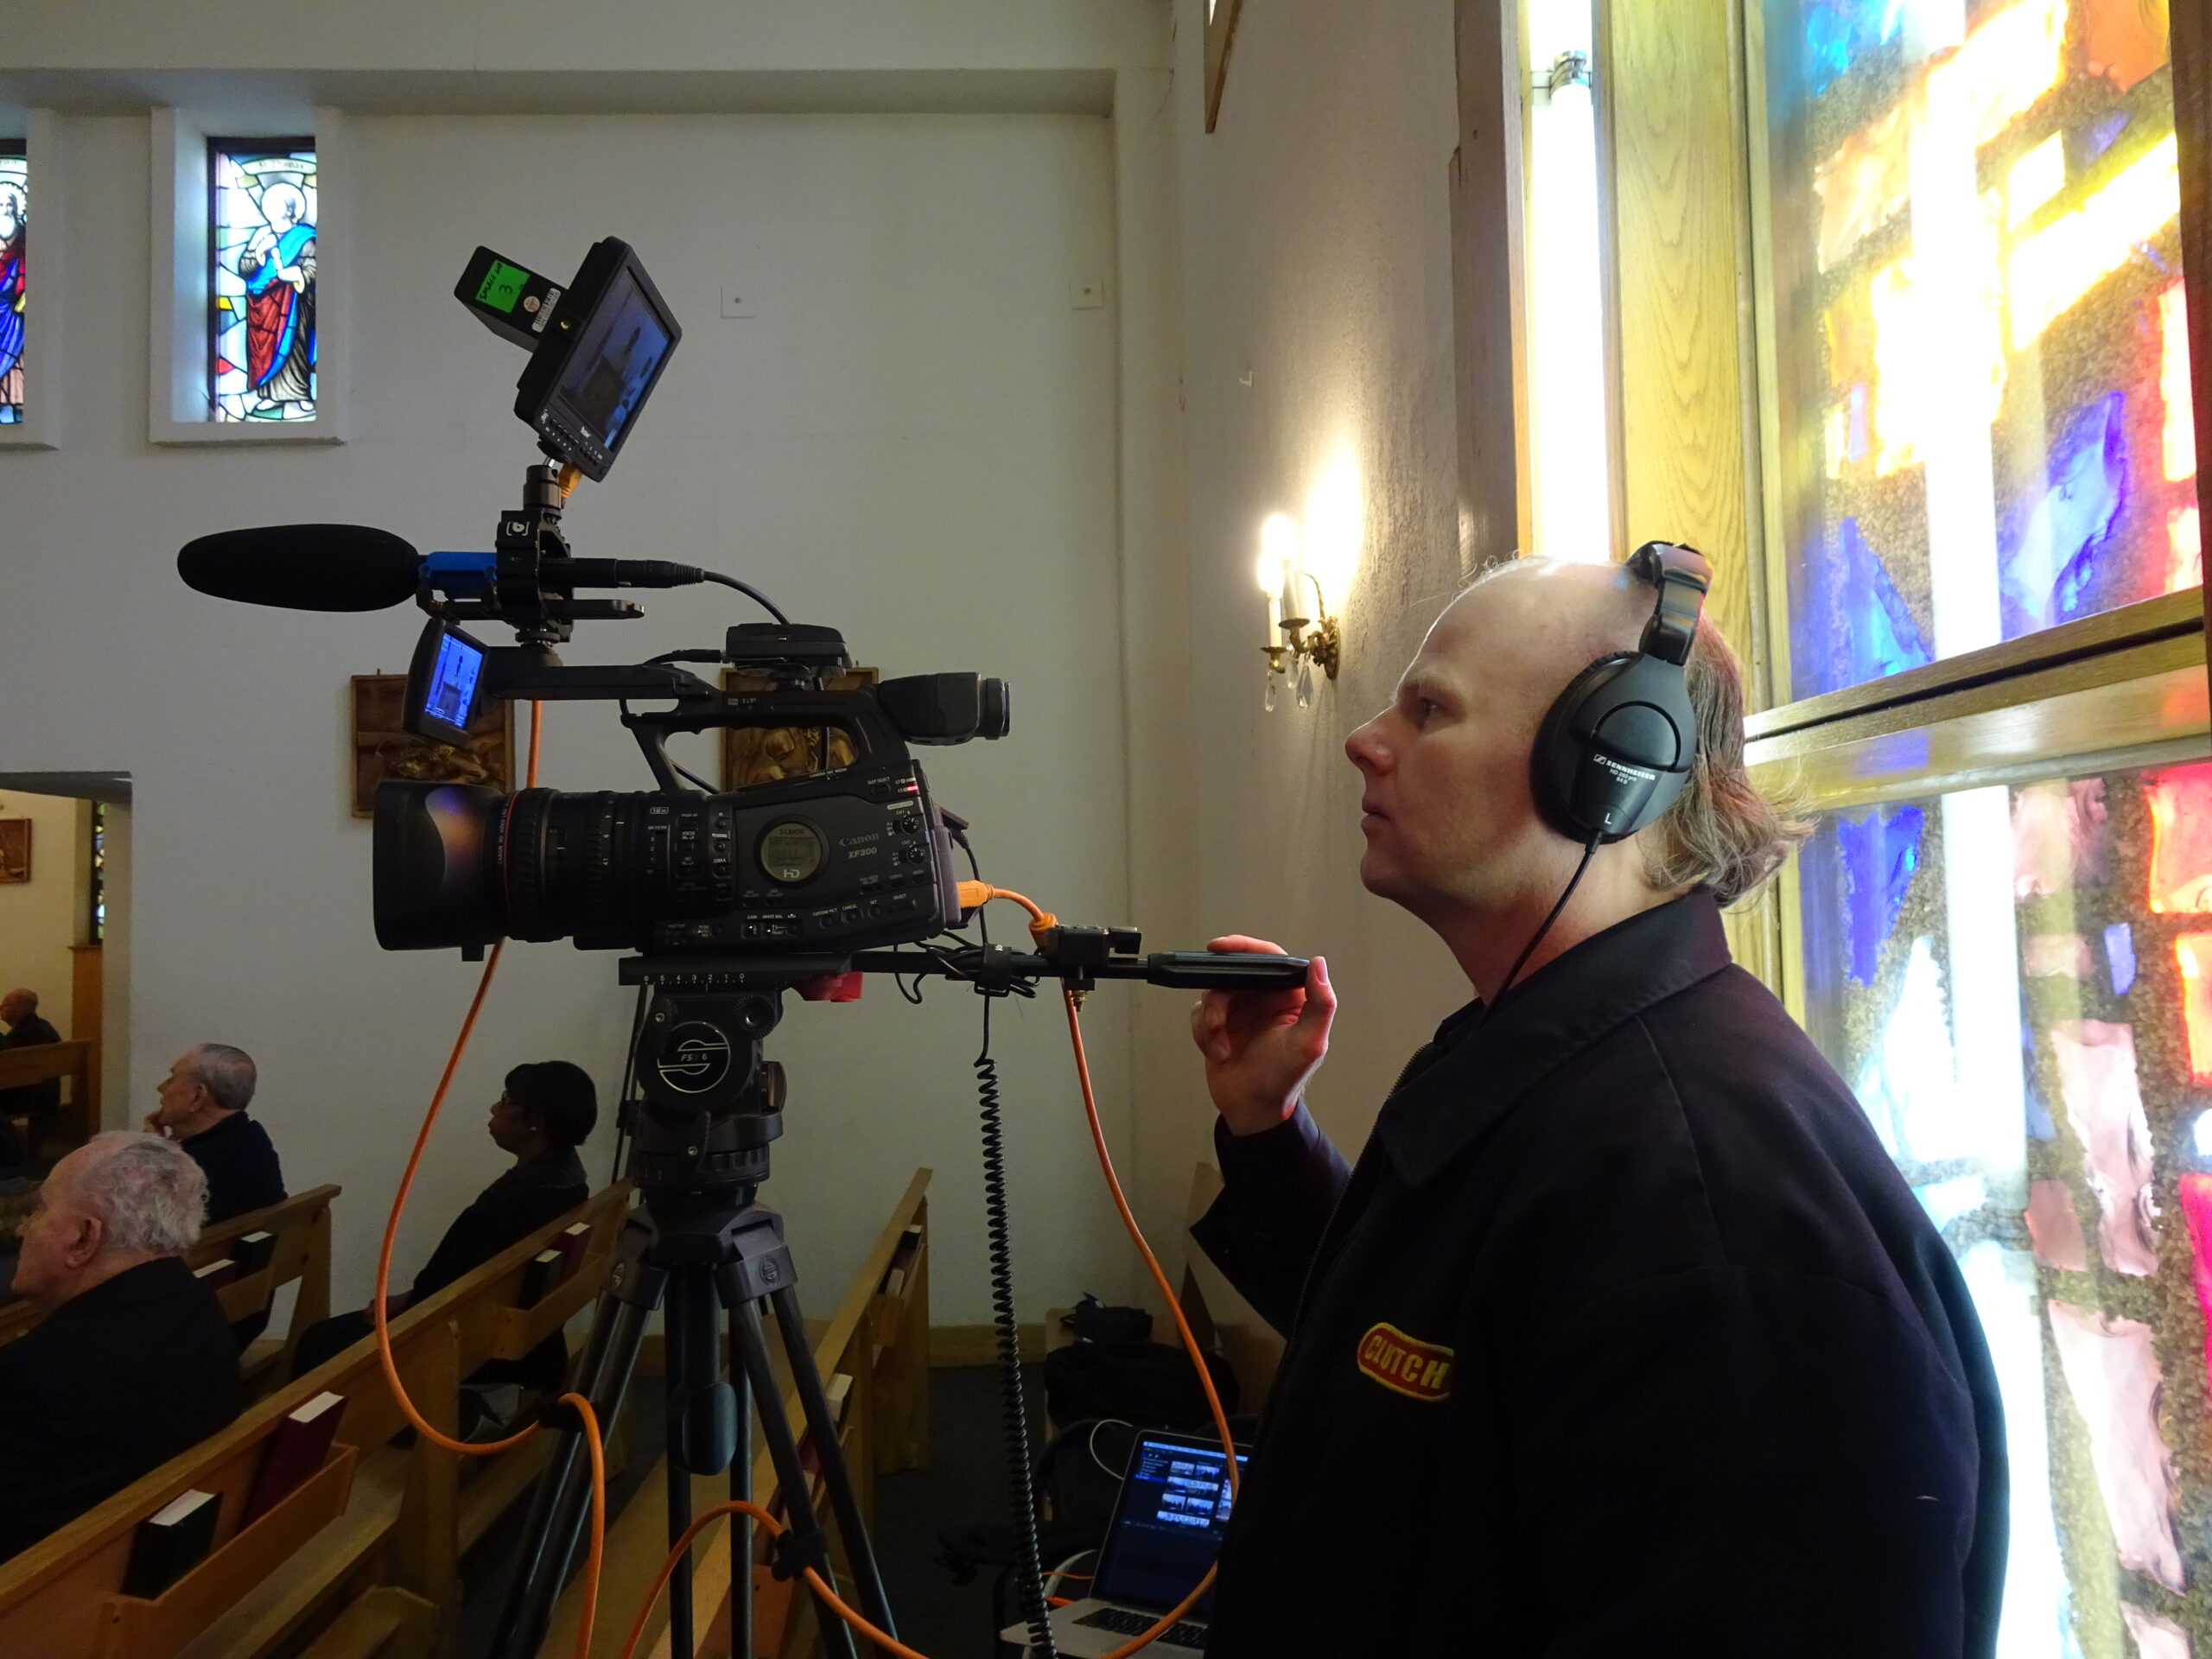 Funeral video production services in Markham.